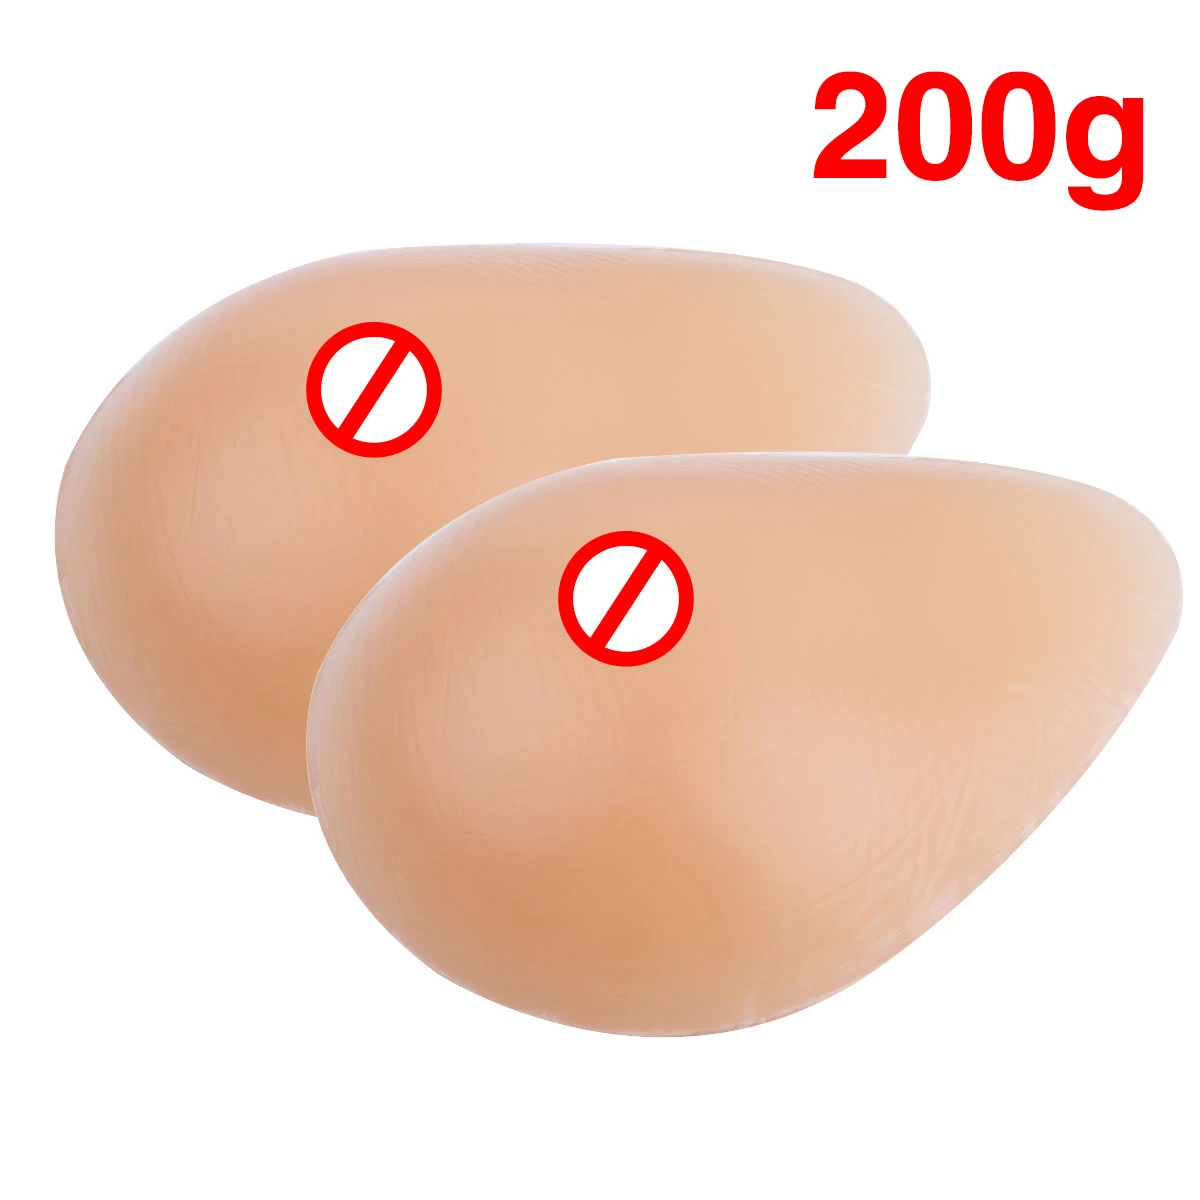 1 Pair 200g Waterdrop Shaped Fake Breast Form Soft Silicone Enhancer Fake Boobs Reusable Breast Pads For Mastectomy Crossdresser Diy Craft Supplies Aliexpress